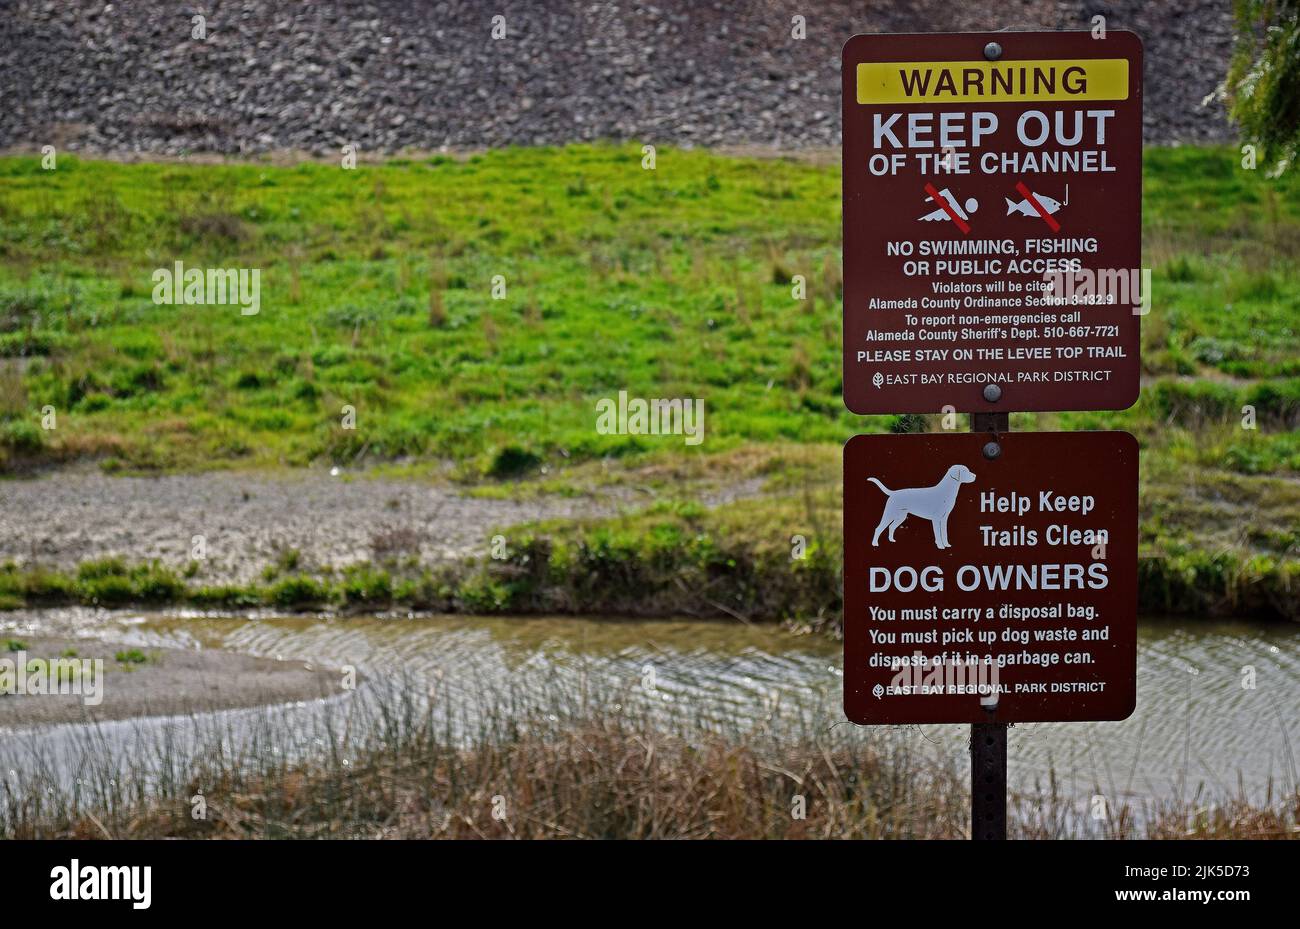 Alameda Creek, no swimming or fishing and rules for dog owners, trail signs, Fremont California Stock Photo